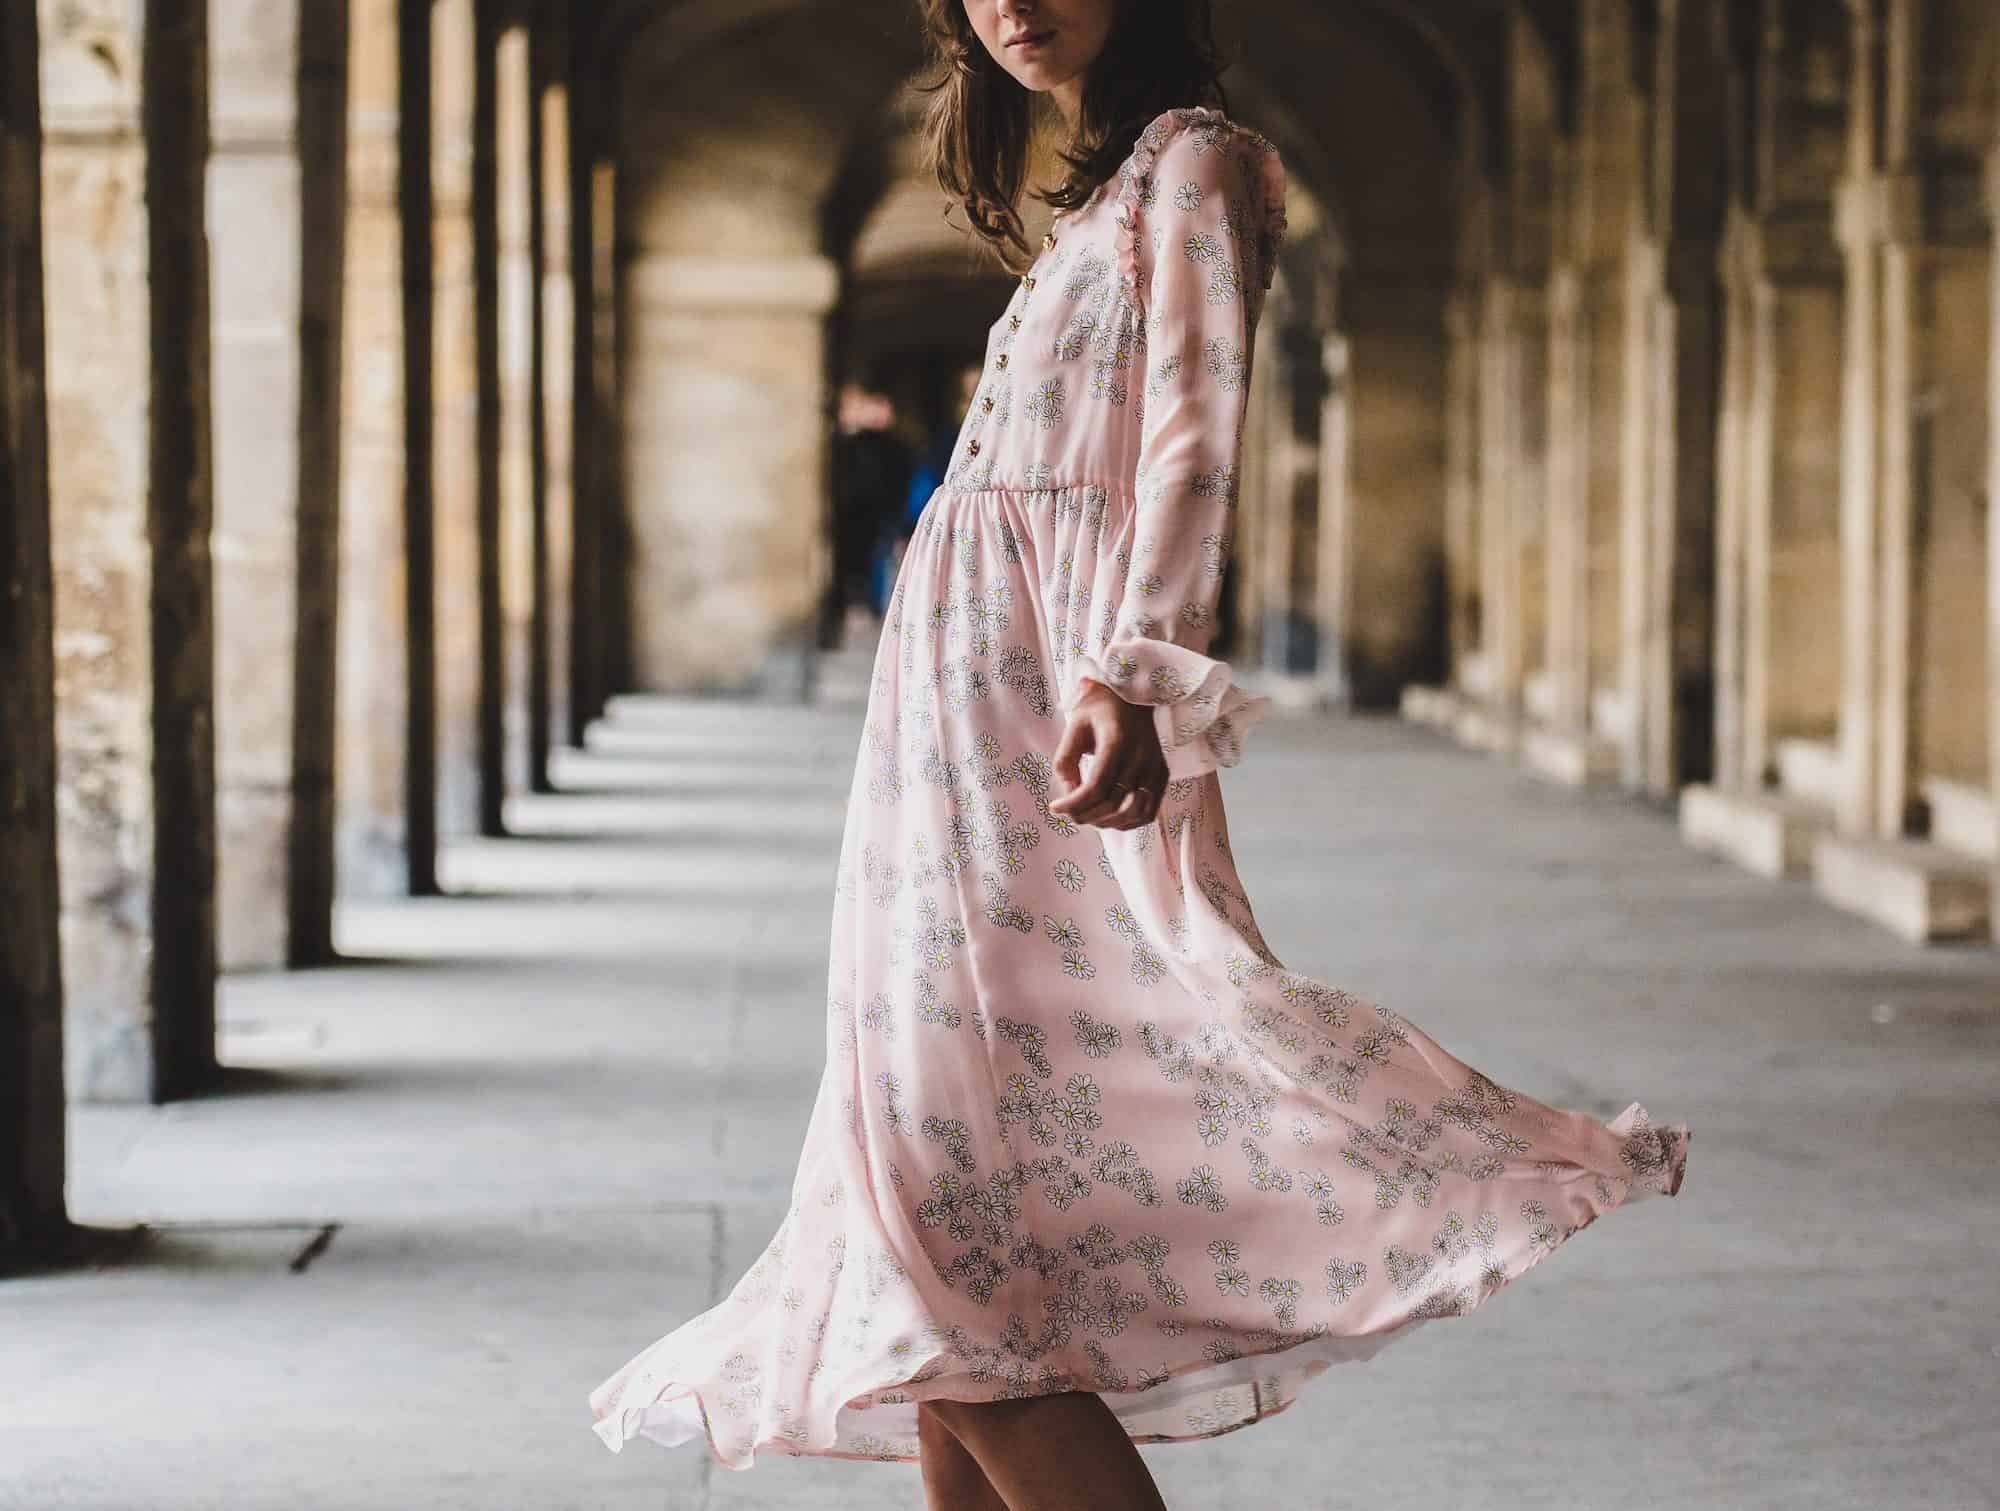 Luxury shopping in Paris made easy with these tips, including how to find stylish bohemian dresses like this one on a woman standing under the arches of the Palais Royal Gardens.